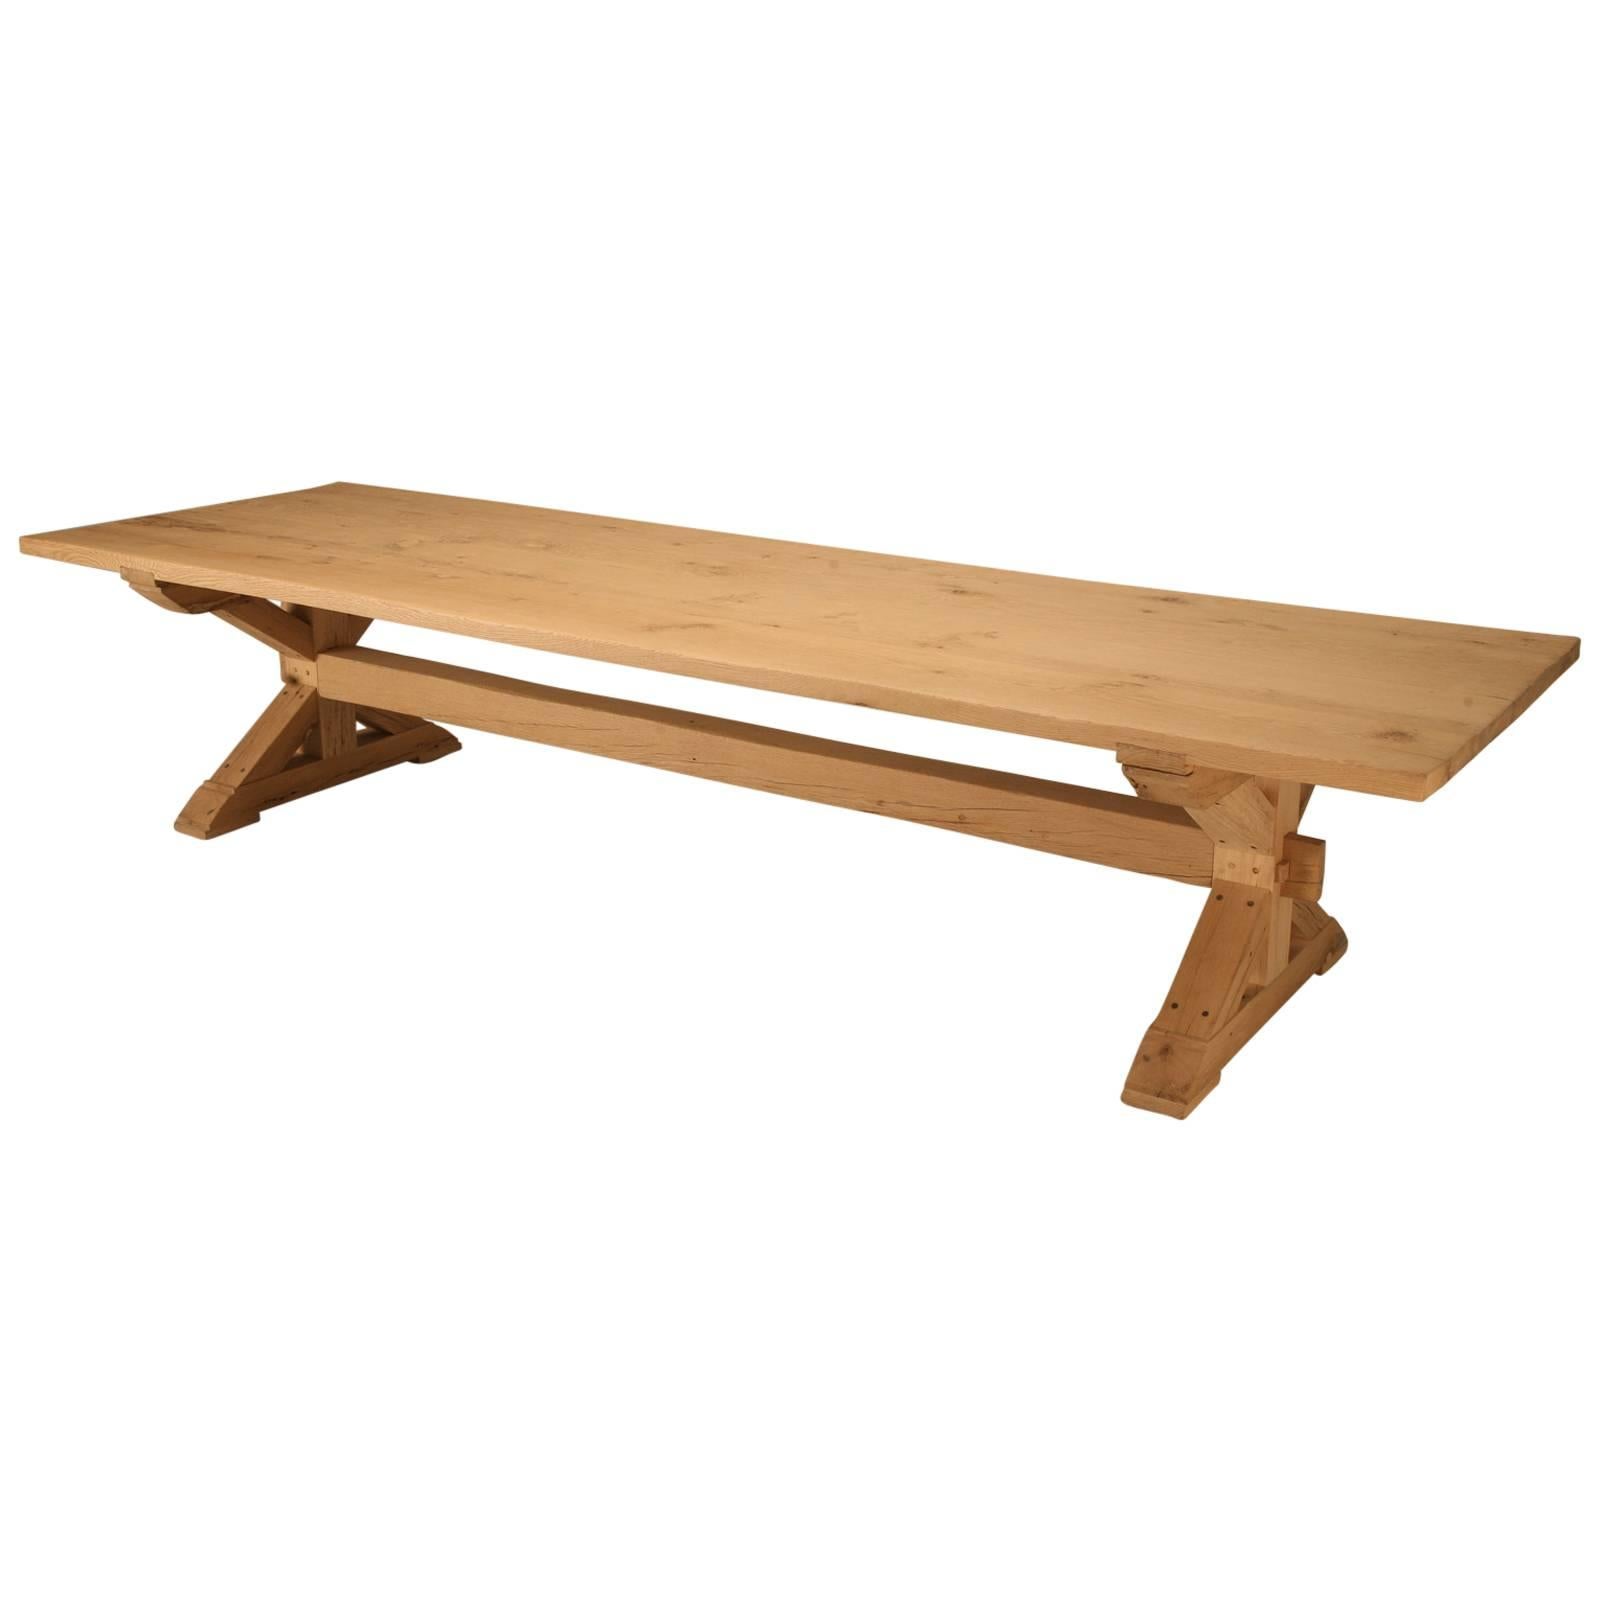 Custom-Made French Inspired Farm Table Reclaimed Oak Any Dimension By Old Plank